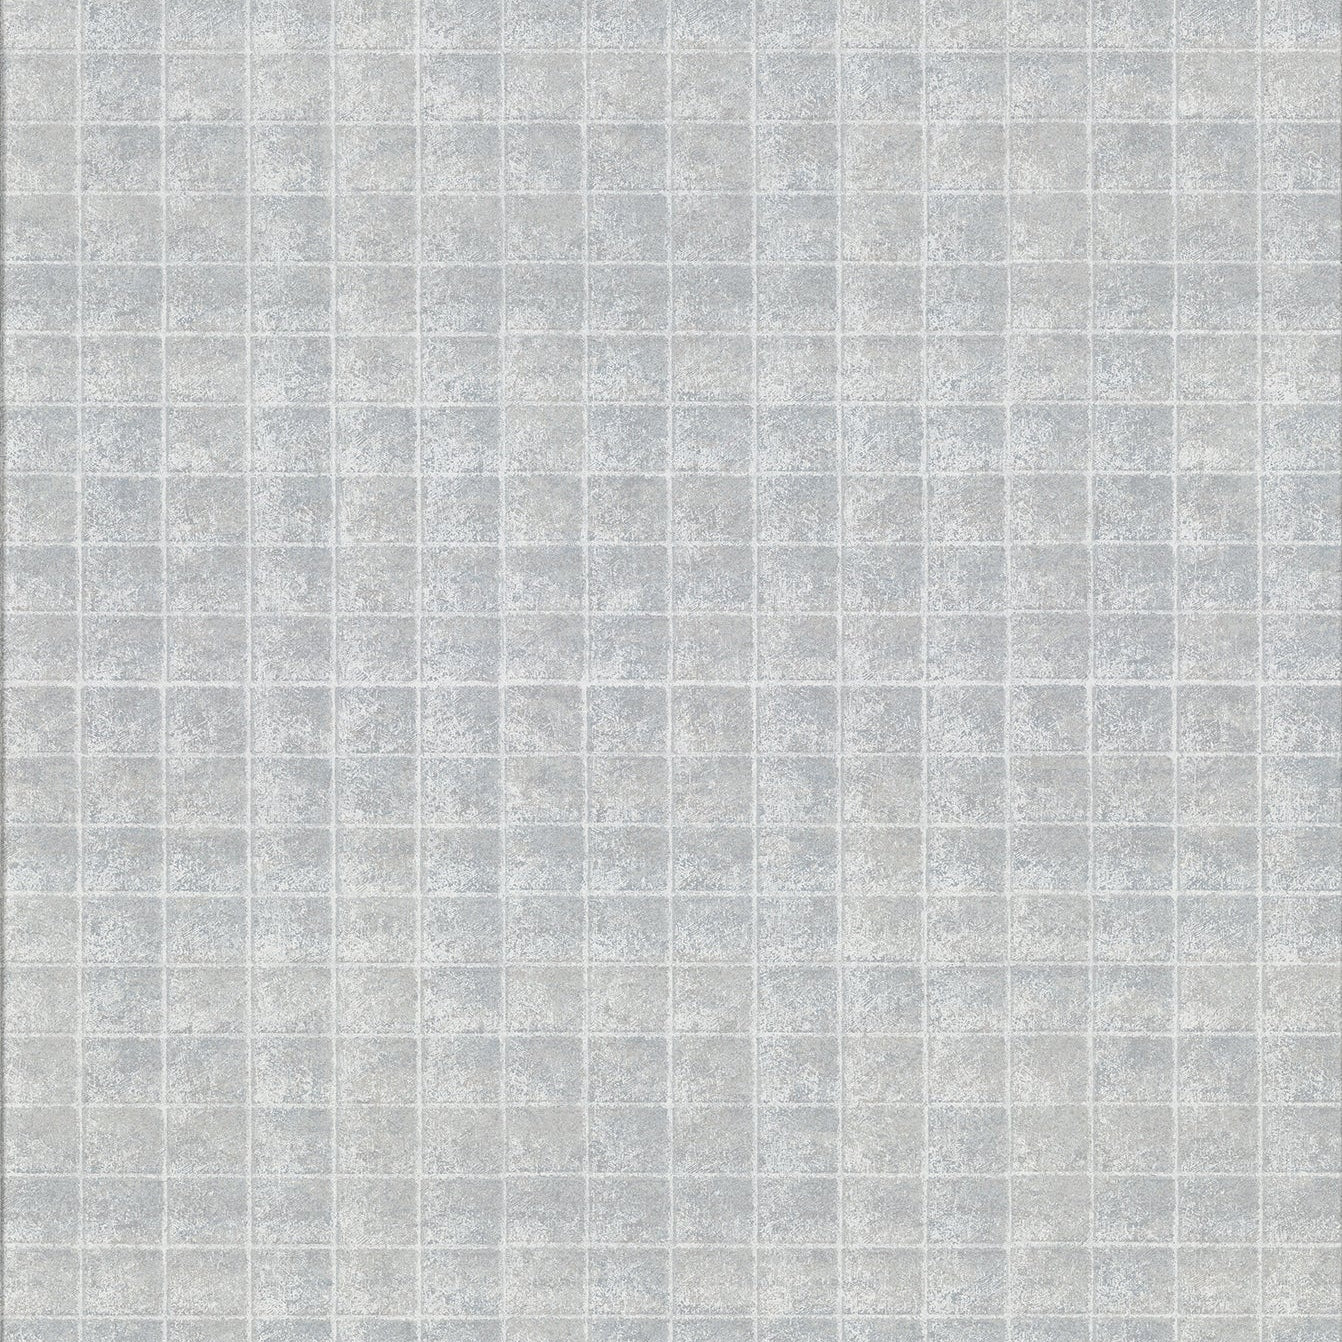 Save 2909-NEW-1011 Riva Nigel Grey Faux Tile Texture Brewster Wallpaper